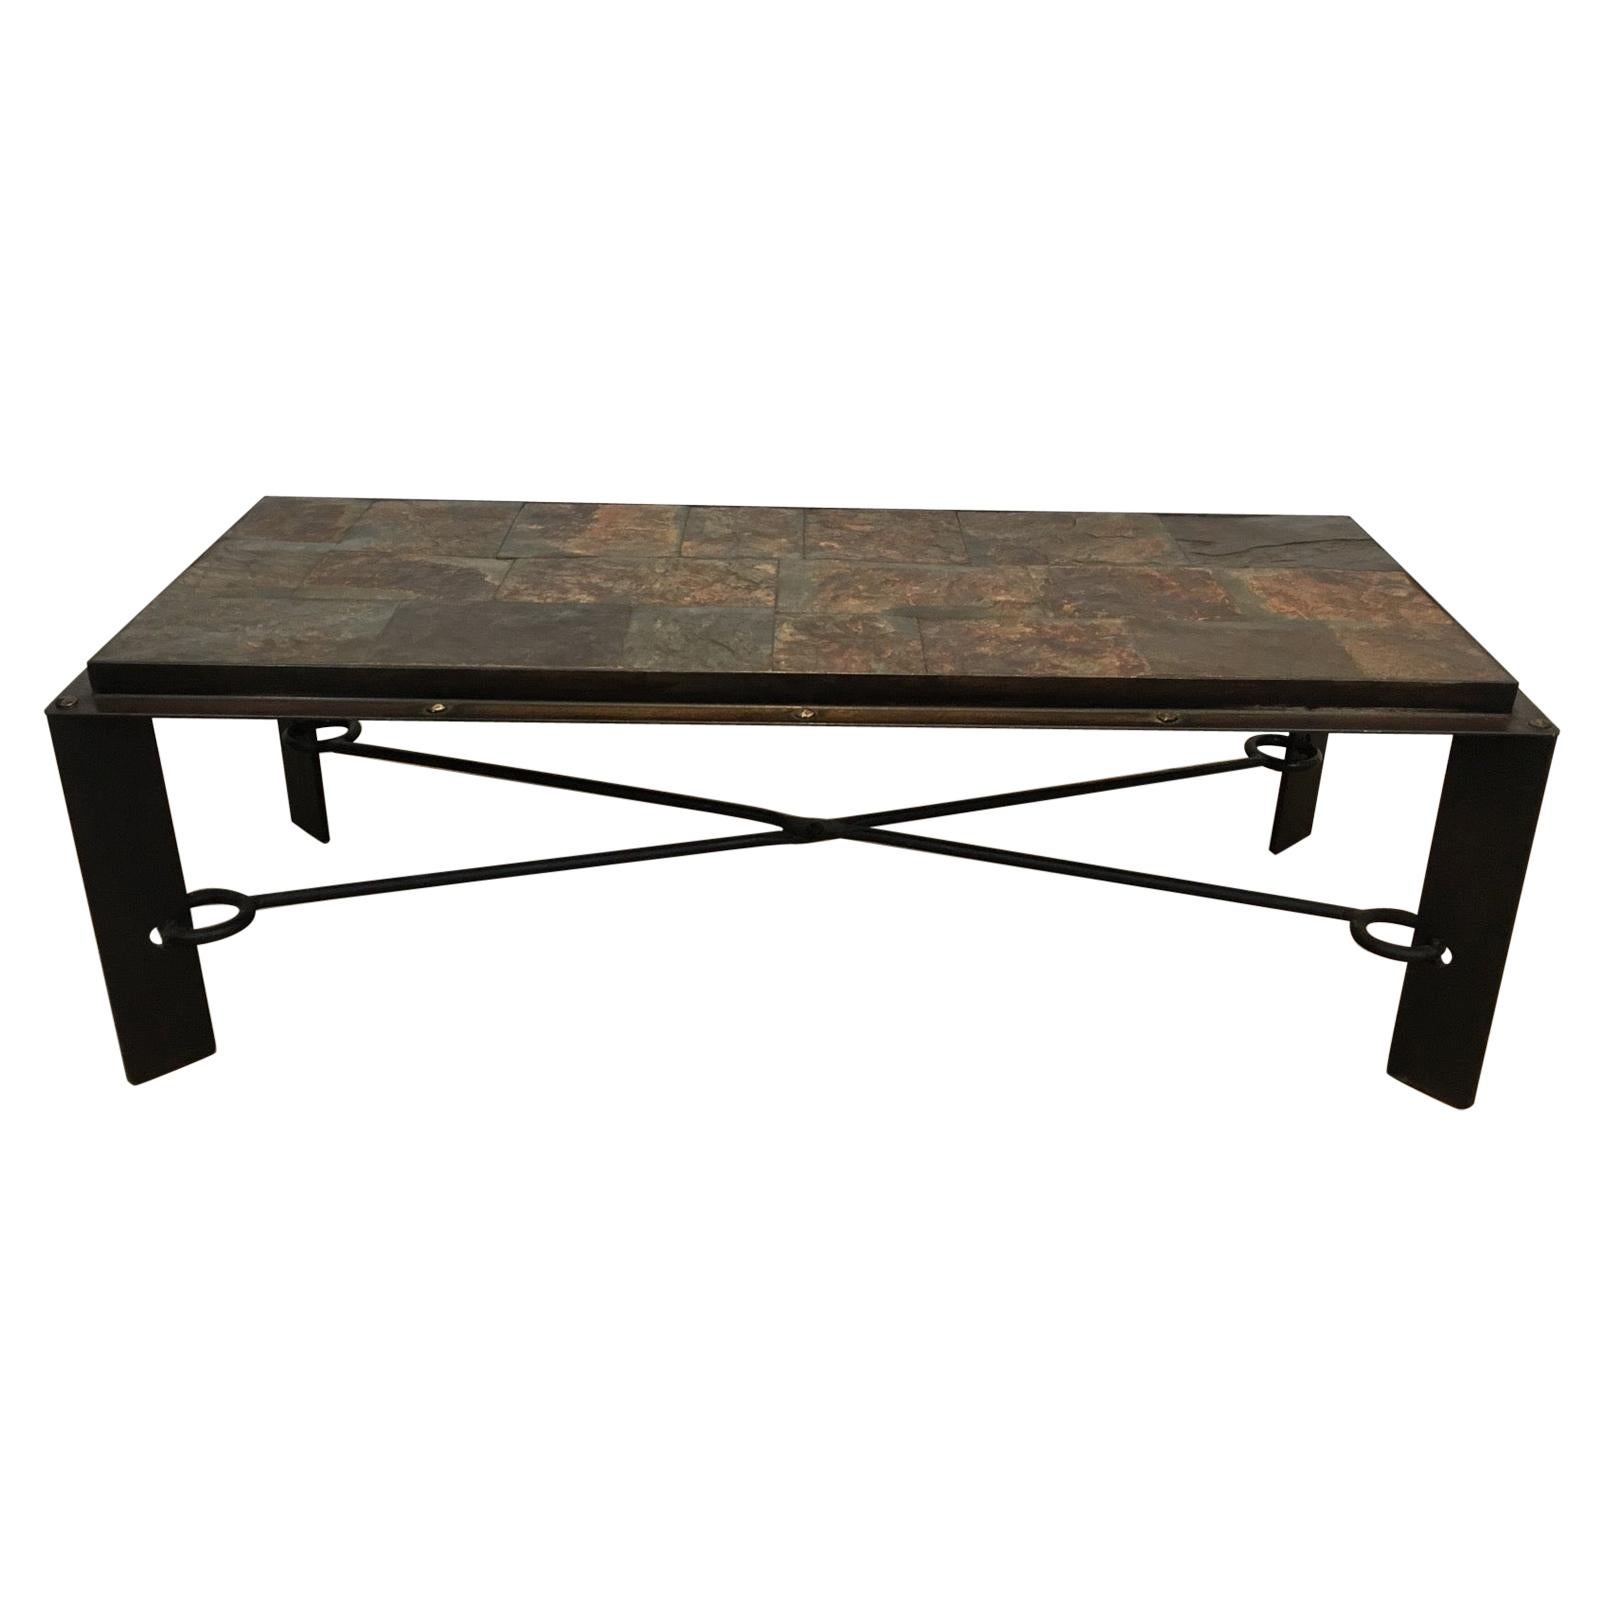 Rare Steel and Iron Coffee Table with Lava Stone Top, circa 1940